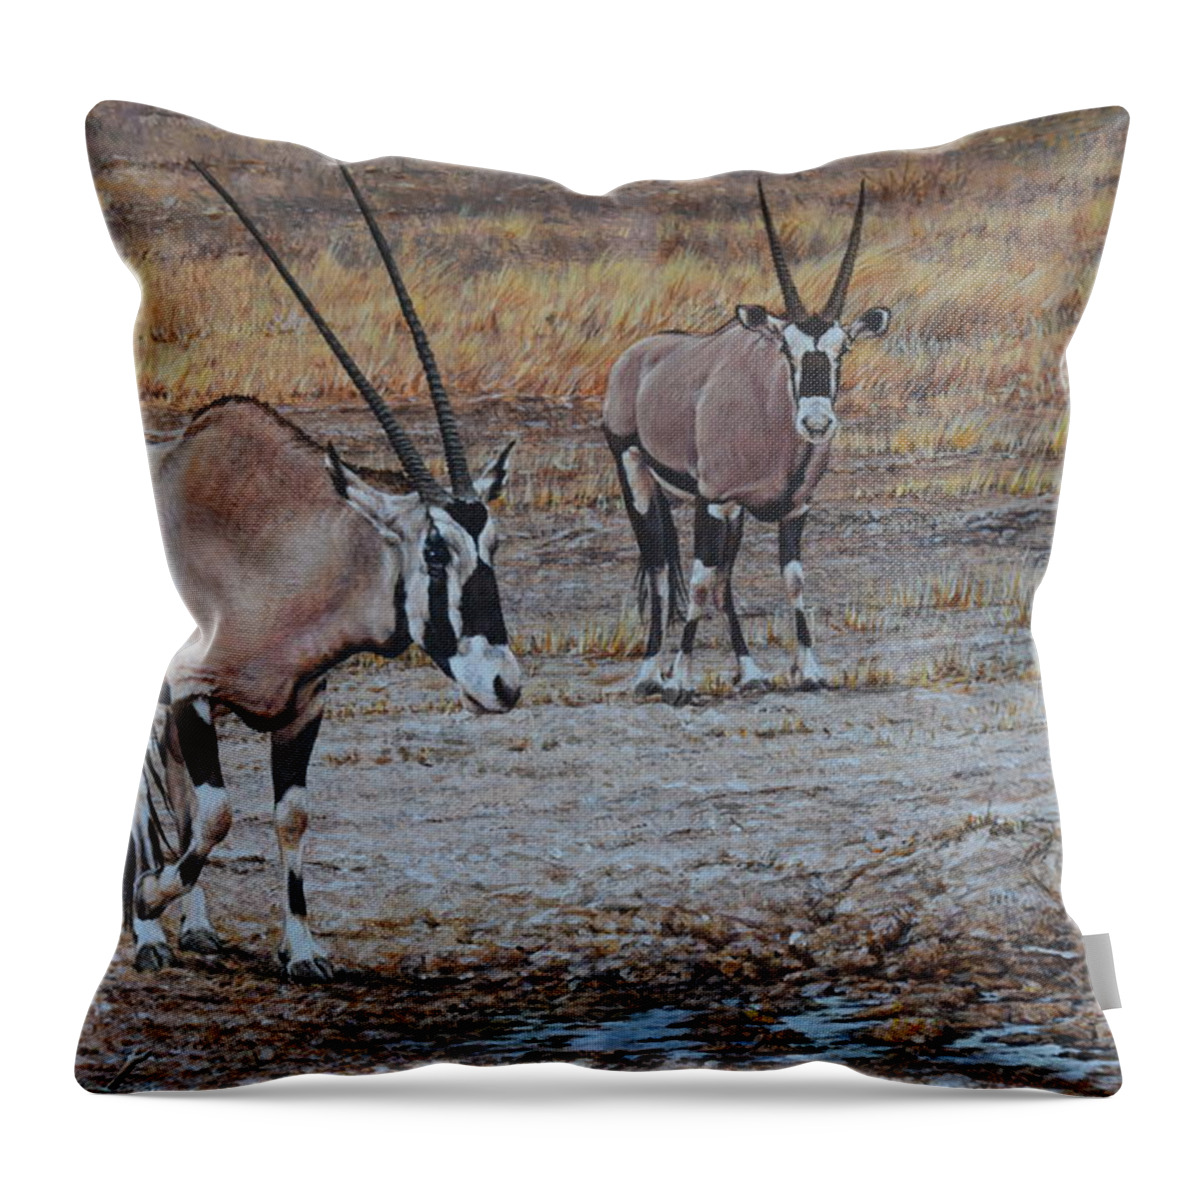 Oryx Throw Pillow featuring the painting Oryx by Alan M Hunt